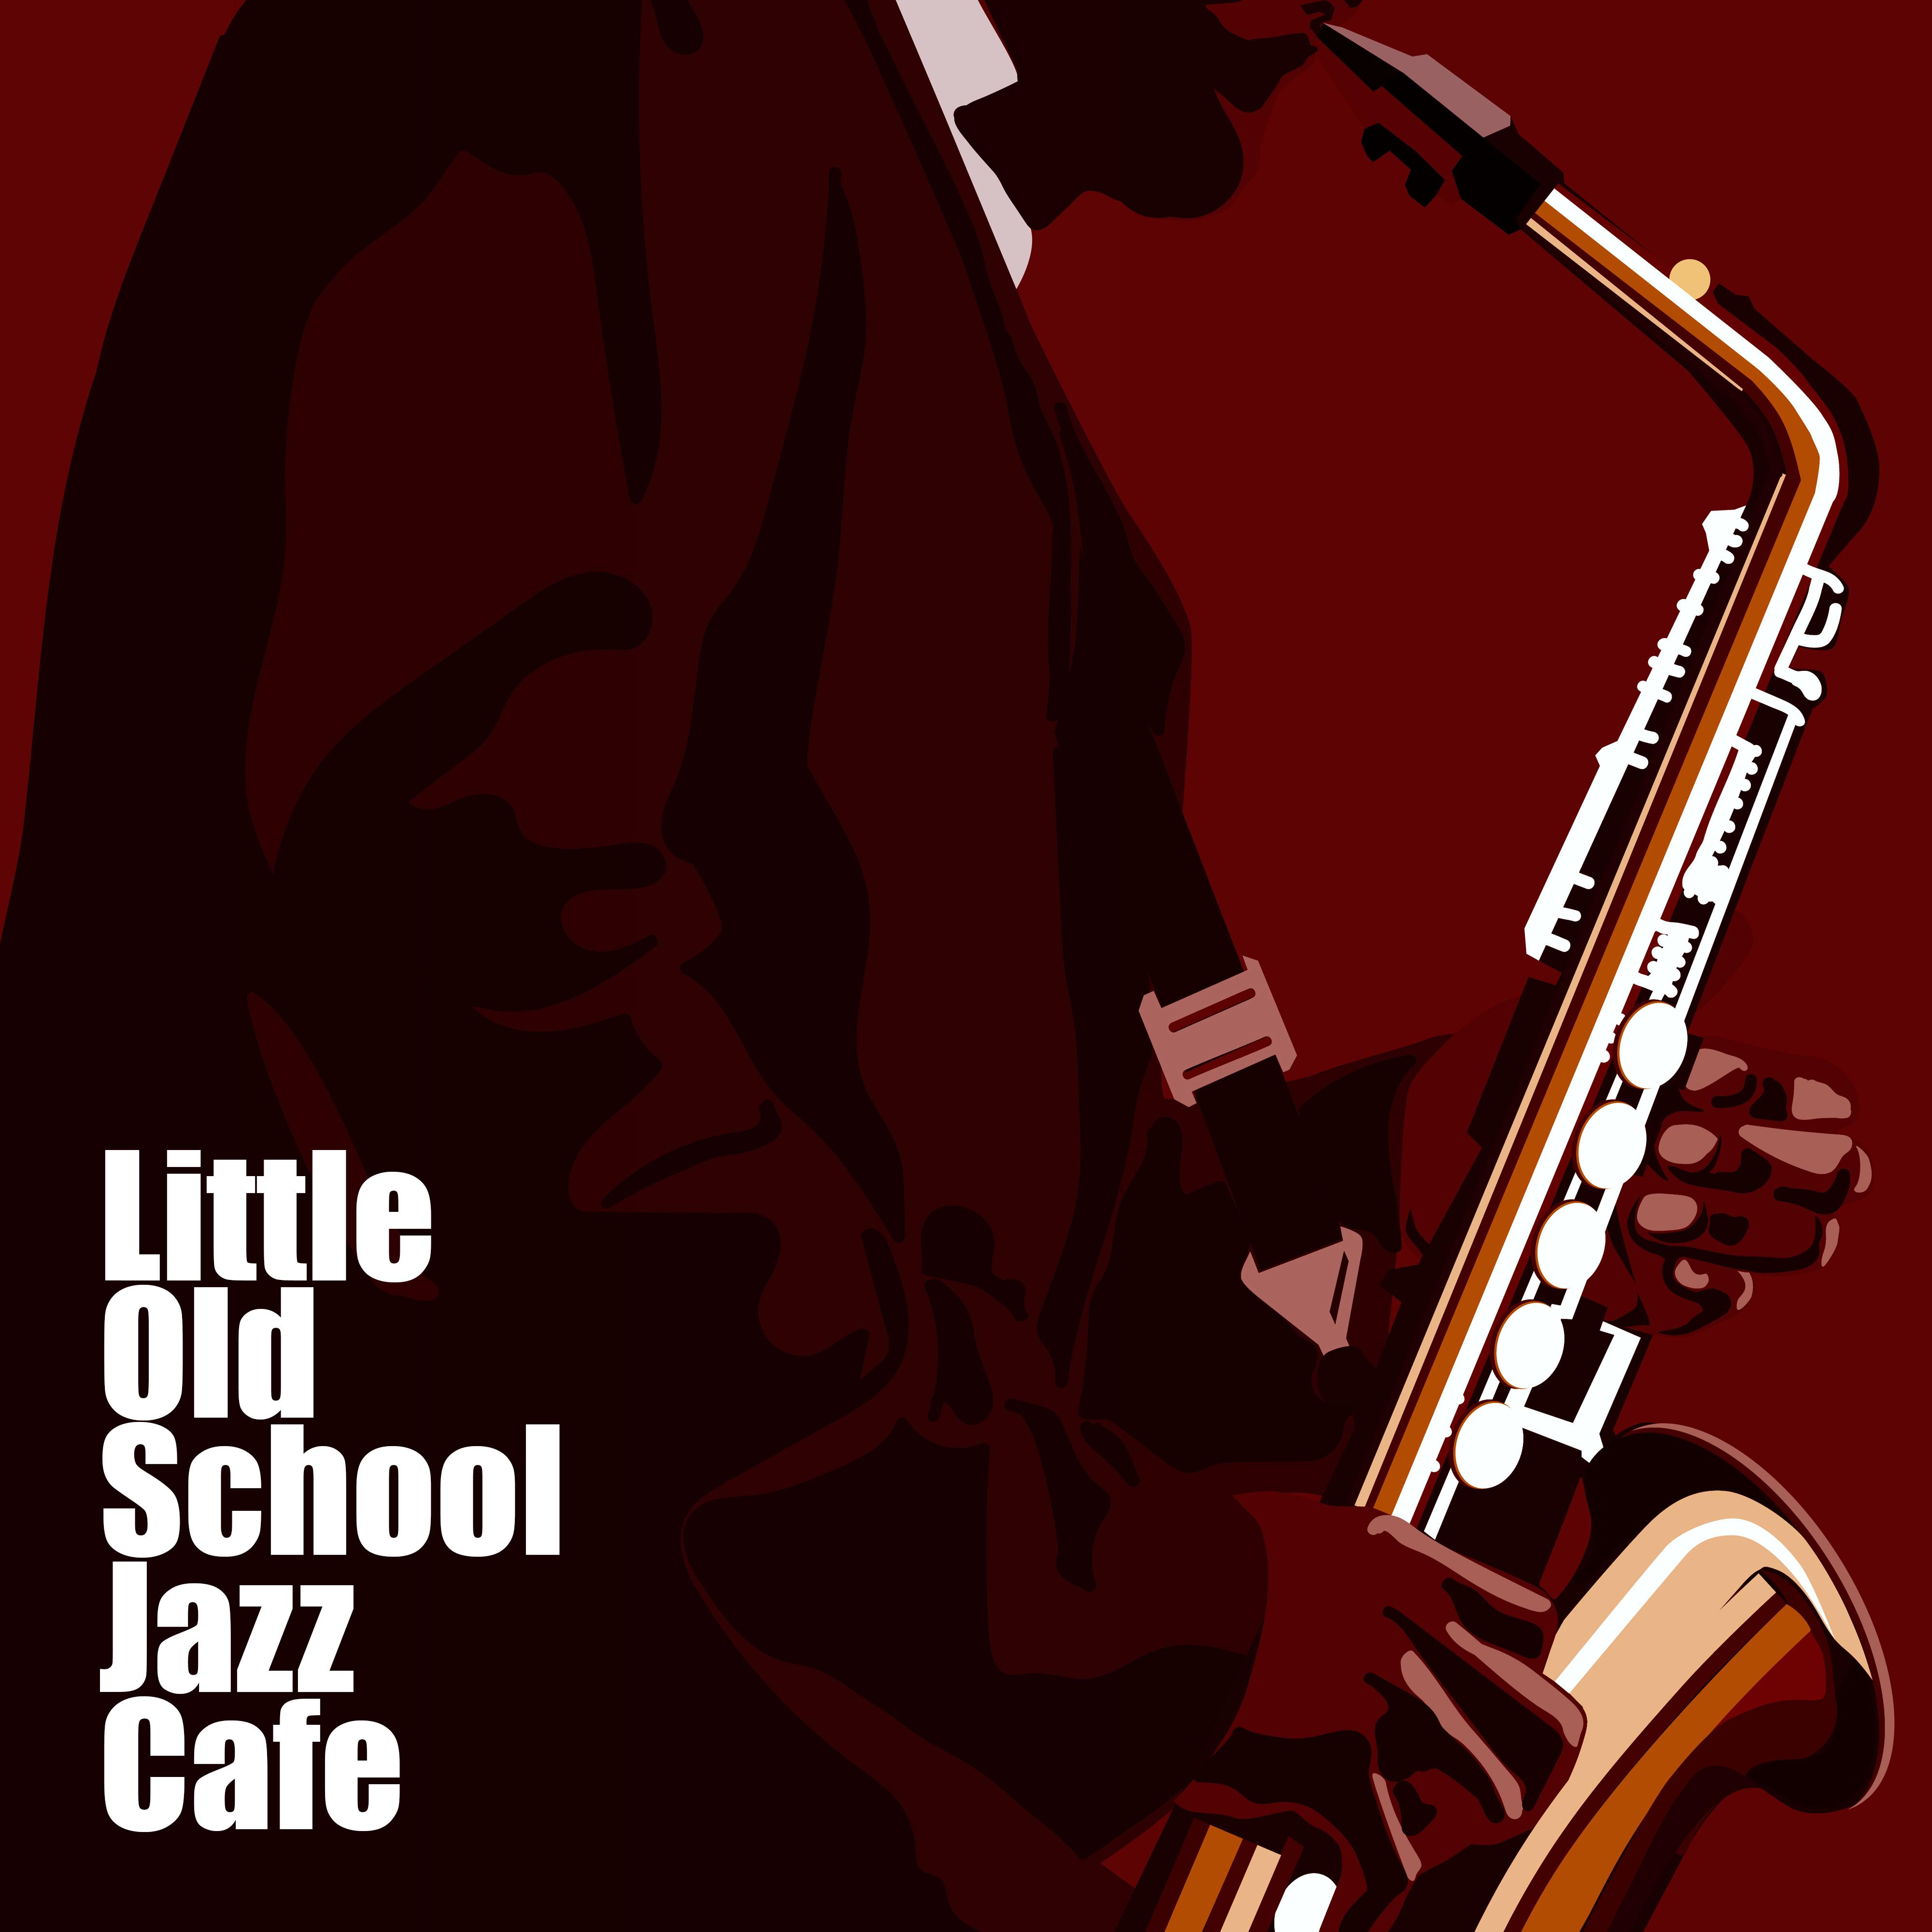 Little Old School Jazz Cafe: Instrumental Smooth Jazz 2019 Music for Nice Time Spending in the Cafe, Ideal Background for Friends Meeting with Coffee & Dessert, Vintage Happy Melodic Jazz